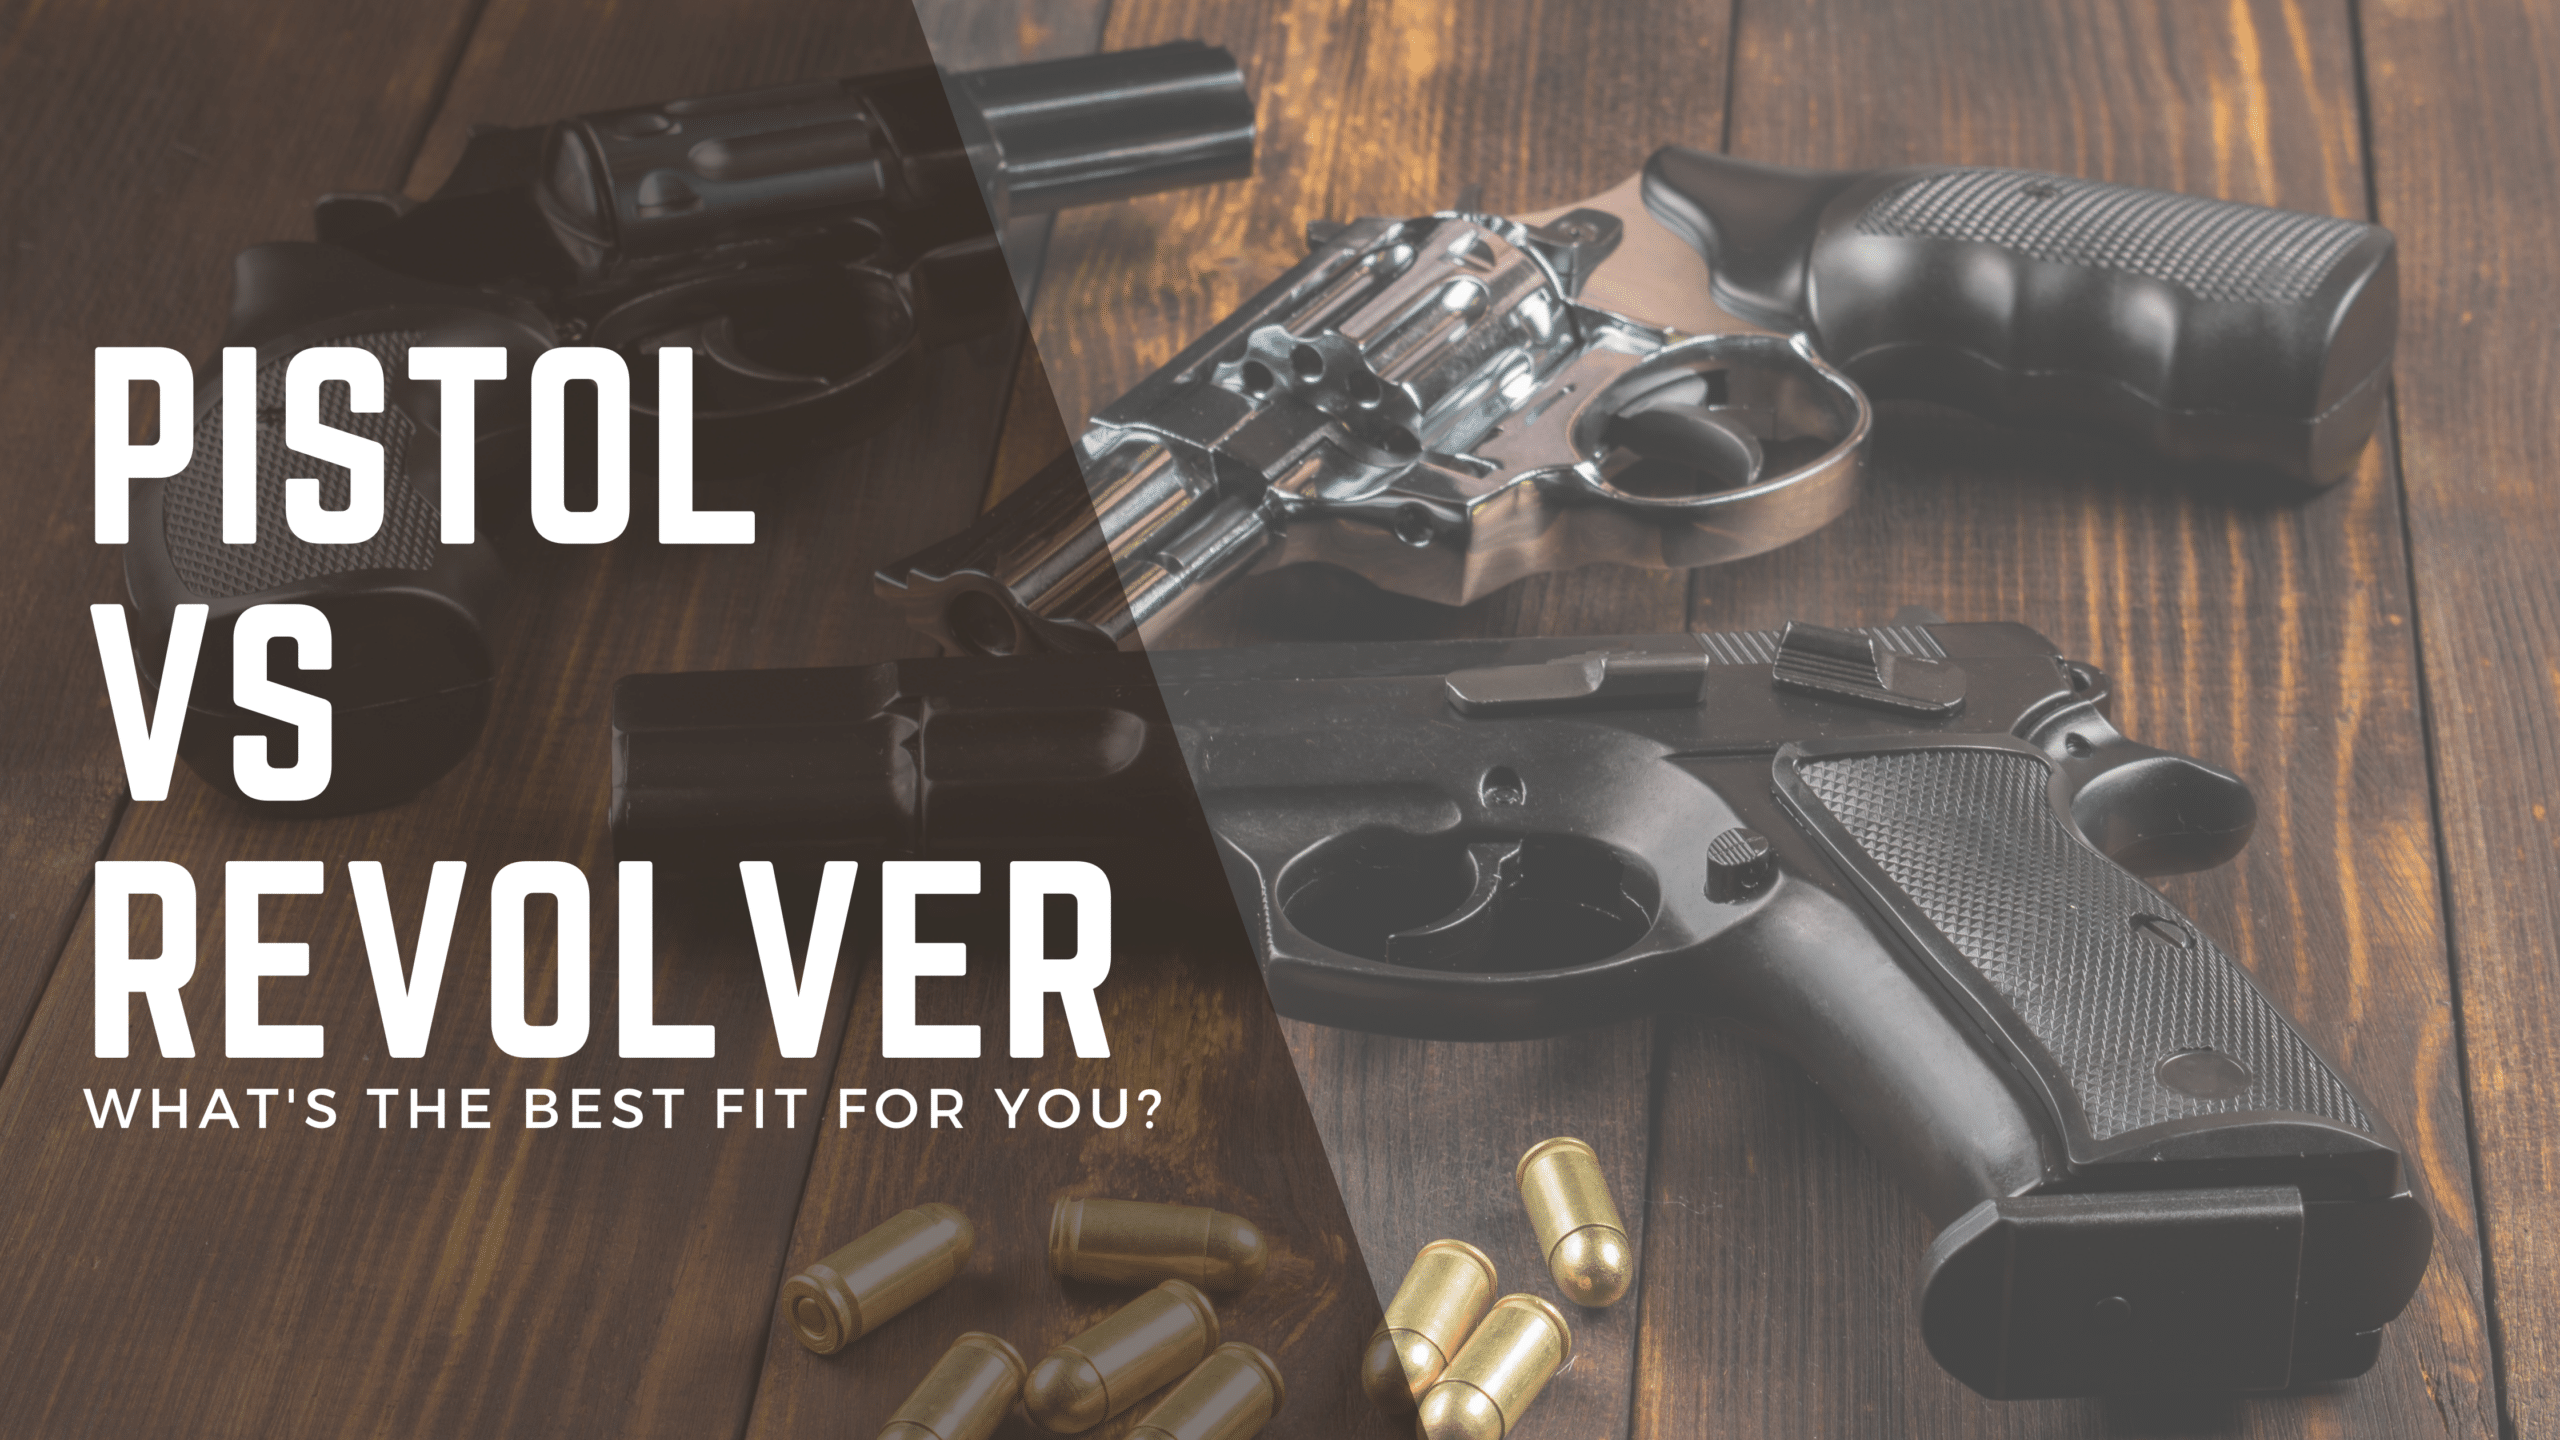 Pistol vs Revolver, What's the best fit for you?